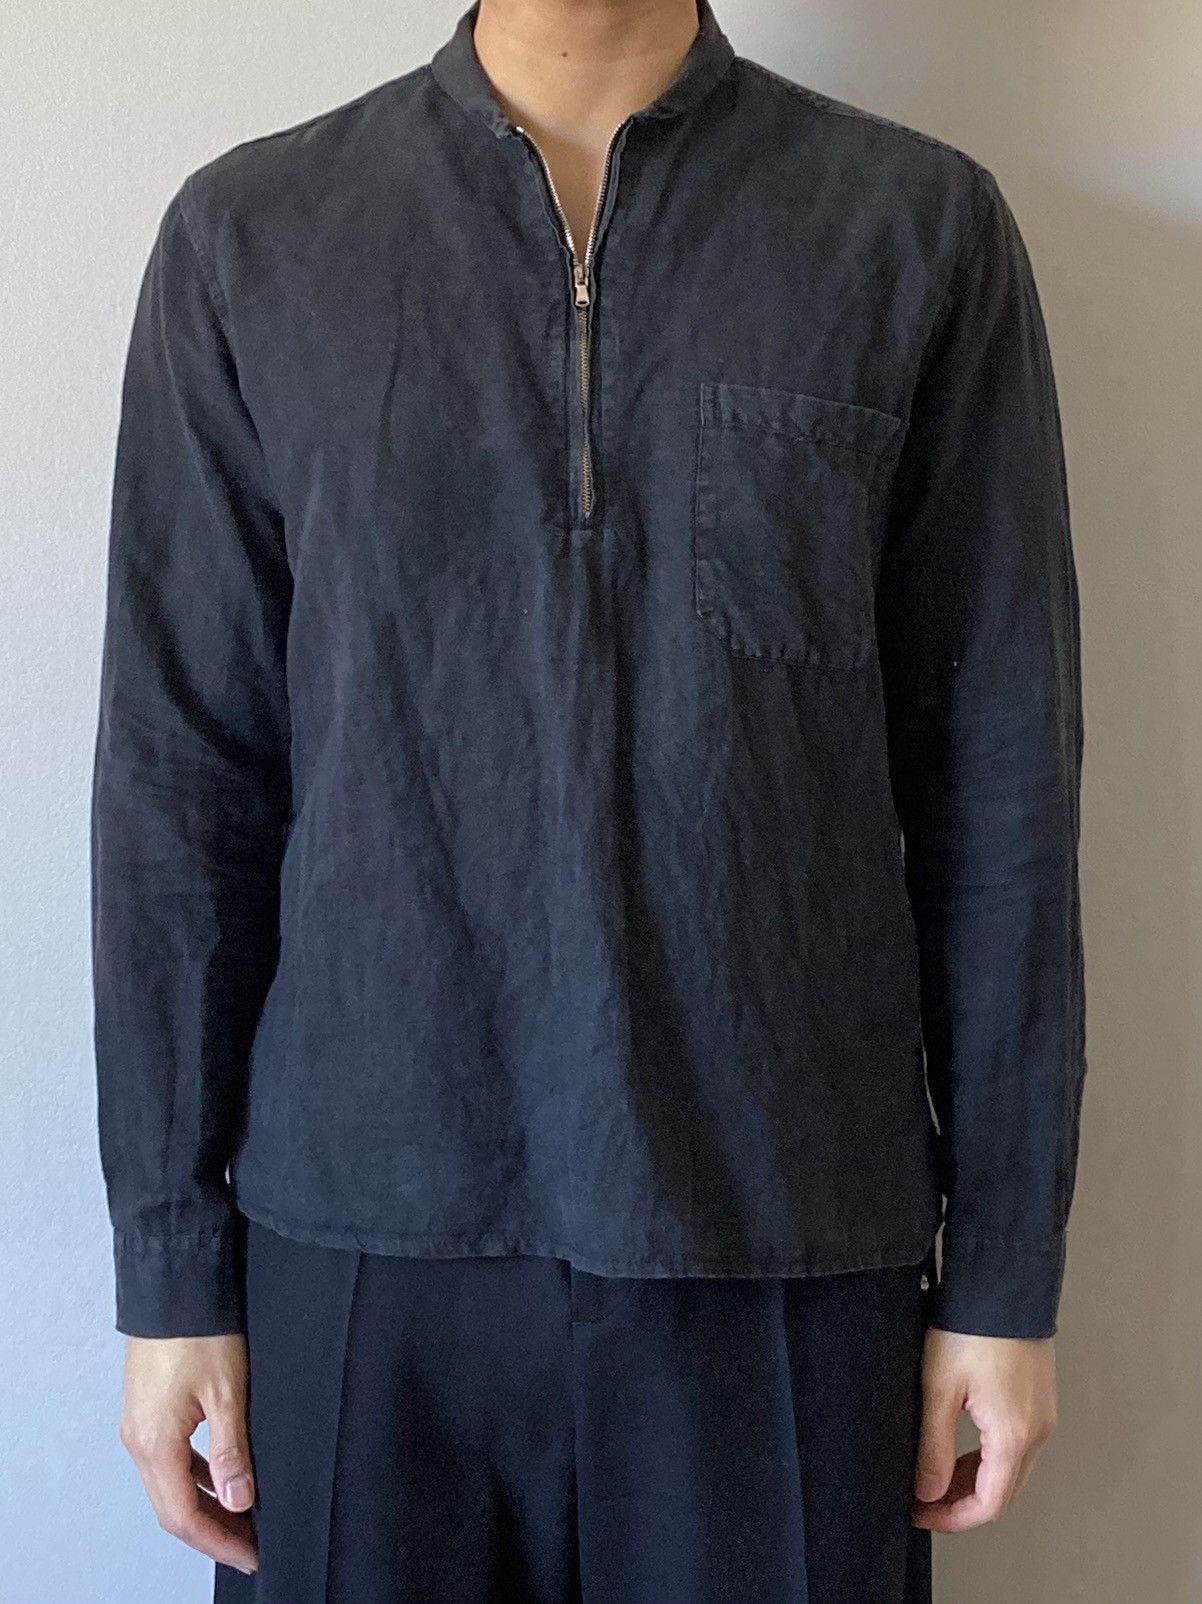 Pre-owned Our Legacy Zip Shawl Shirt - Black Linen